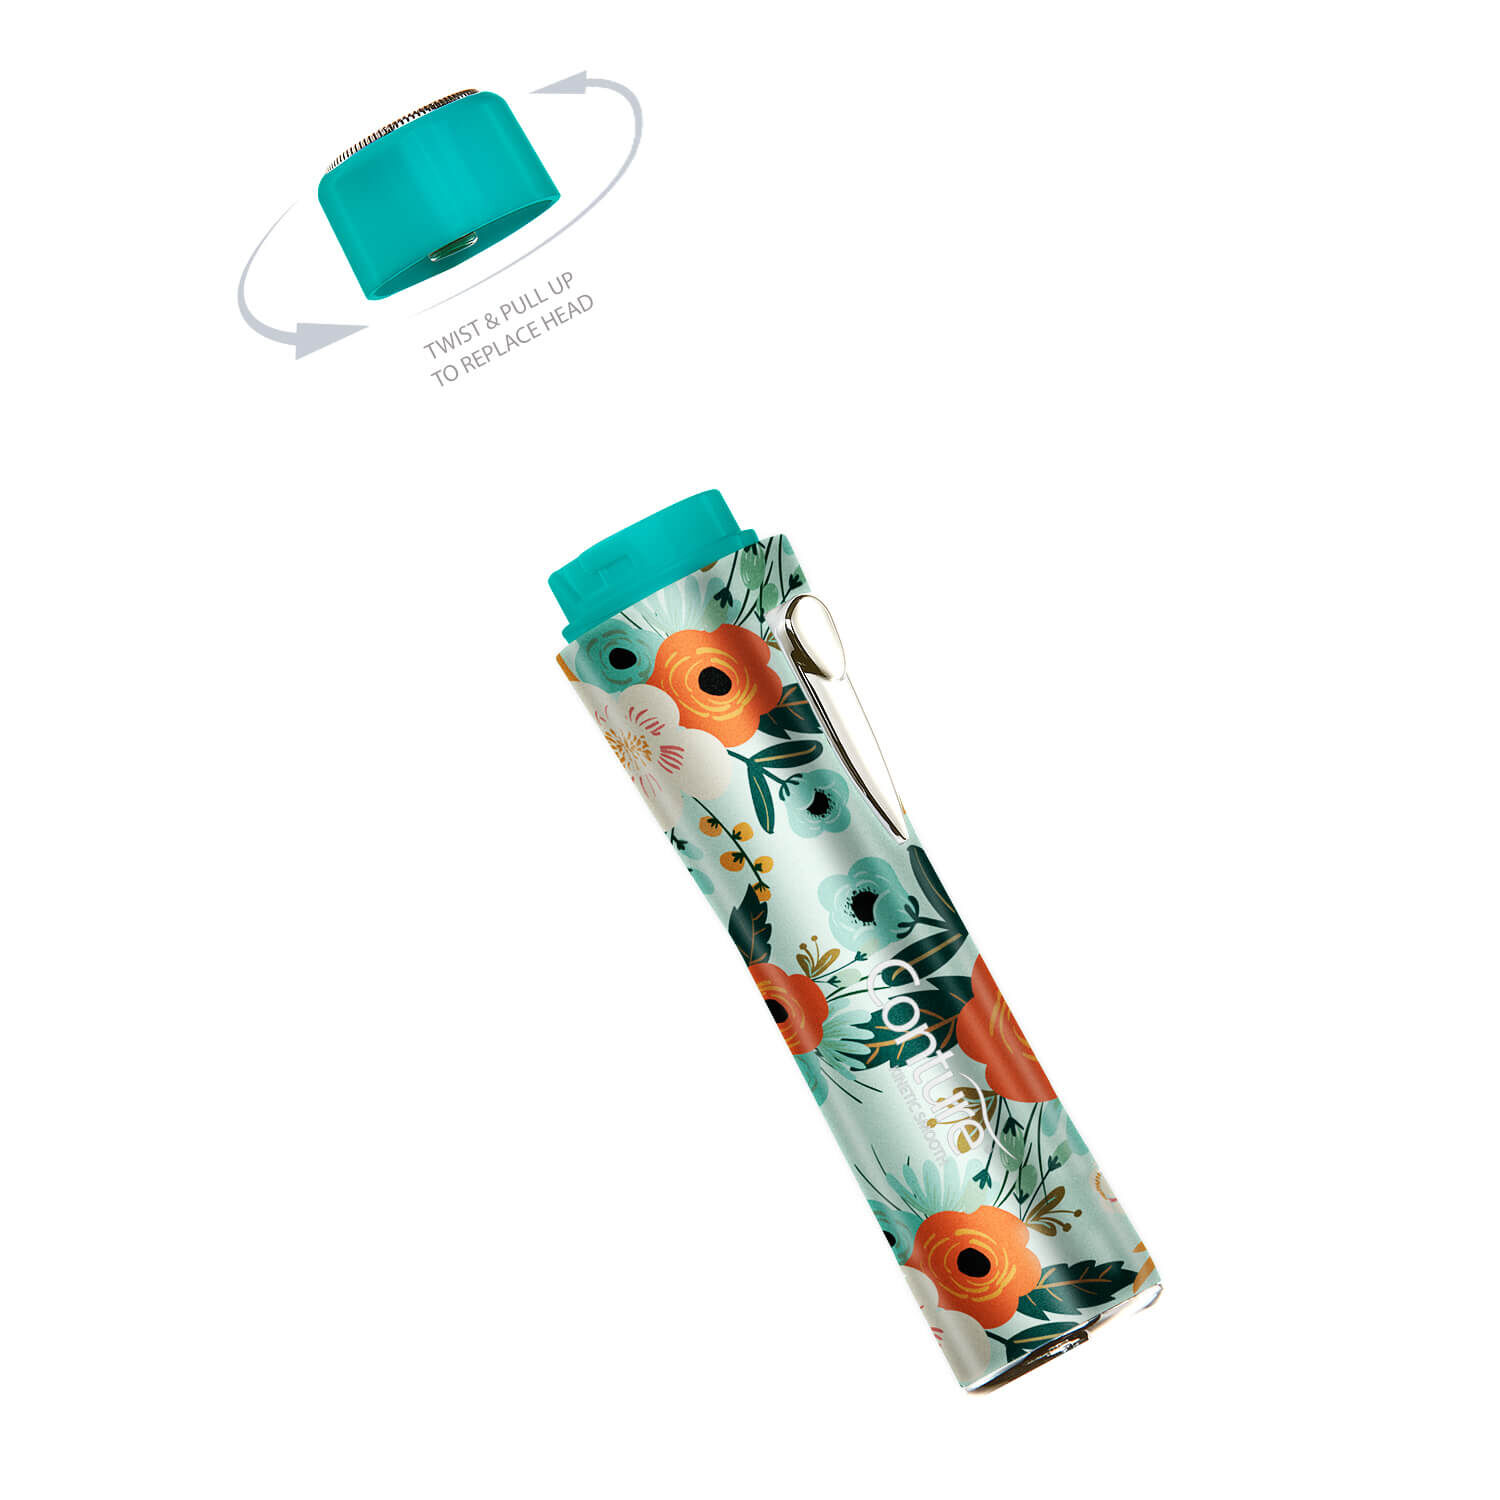 Conture Kinetic Smooth Hair Remover & Skin Refining Polisher Turquoise Poppy Image - 31